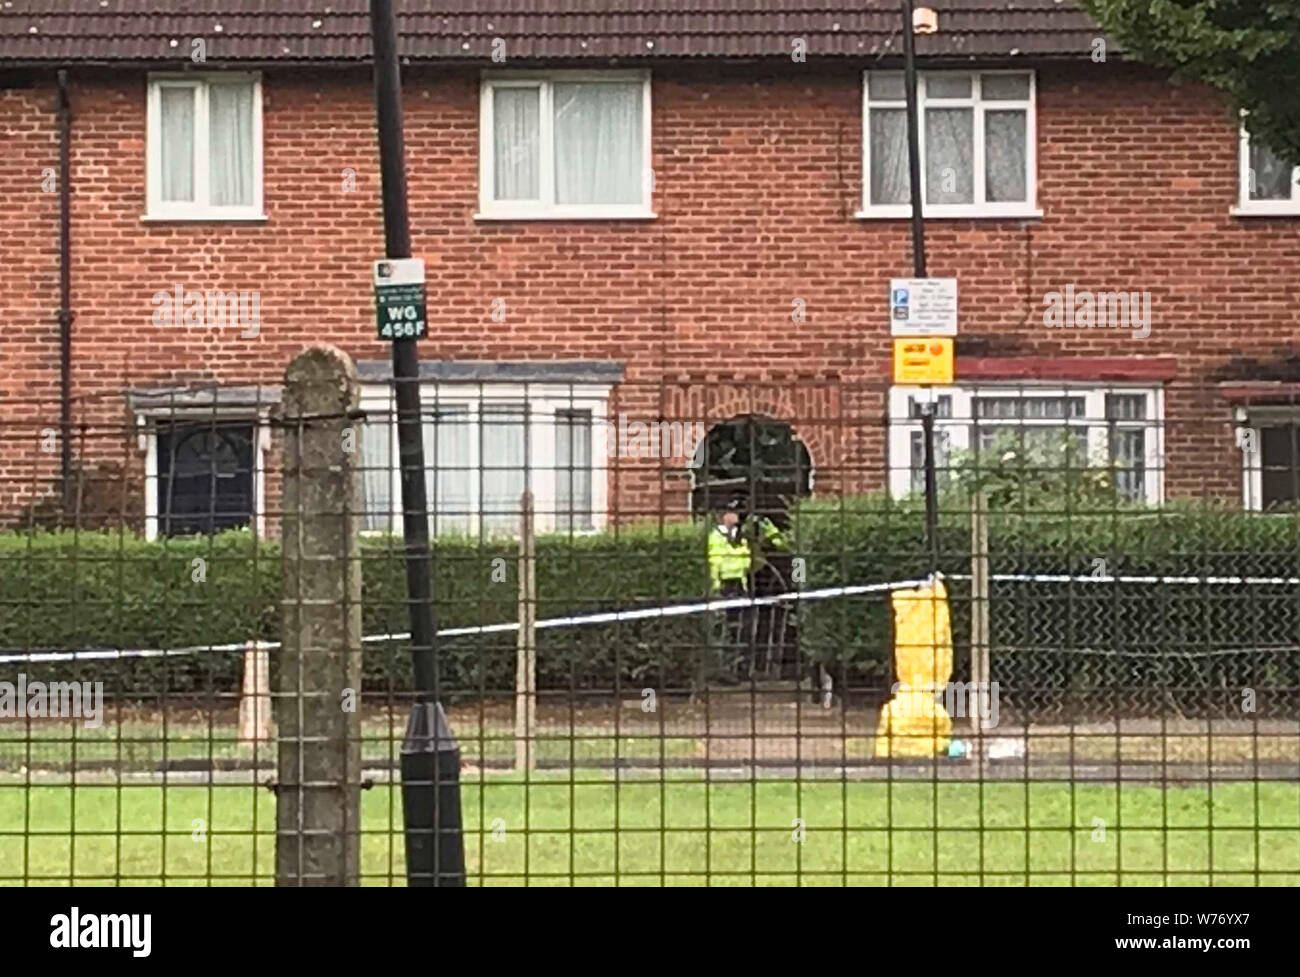 Police in Waltheof Gardens in Tottenham, north London after an 89-year-old woman was found murdered in her own home. Stock Photo